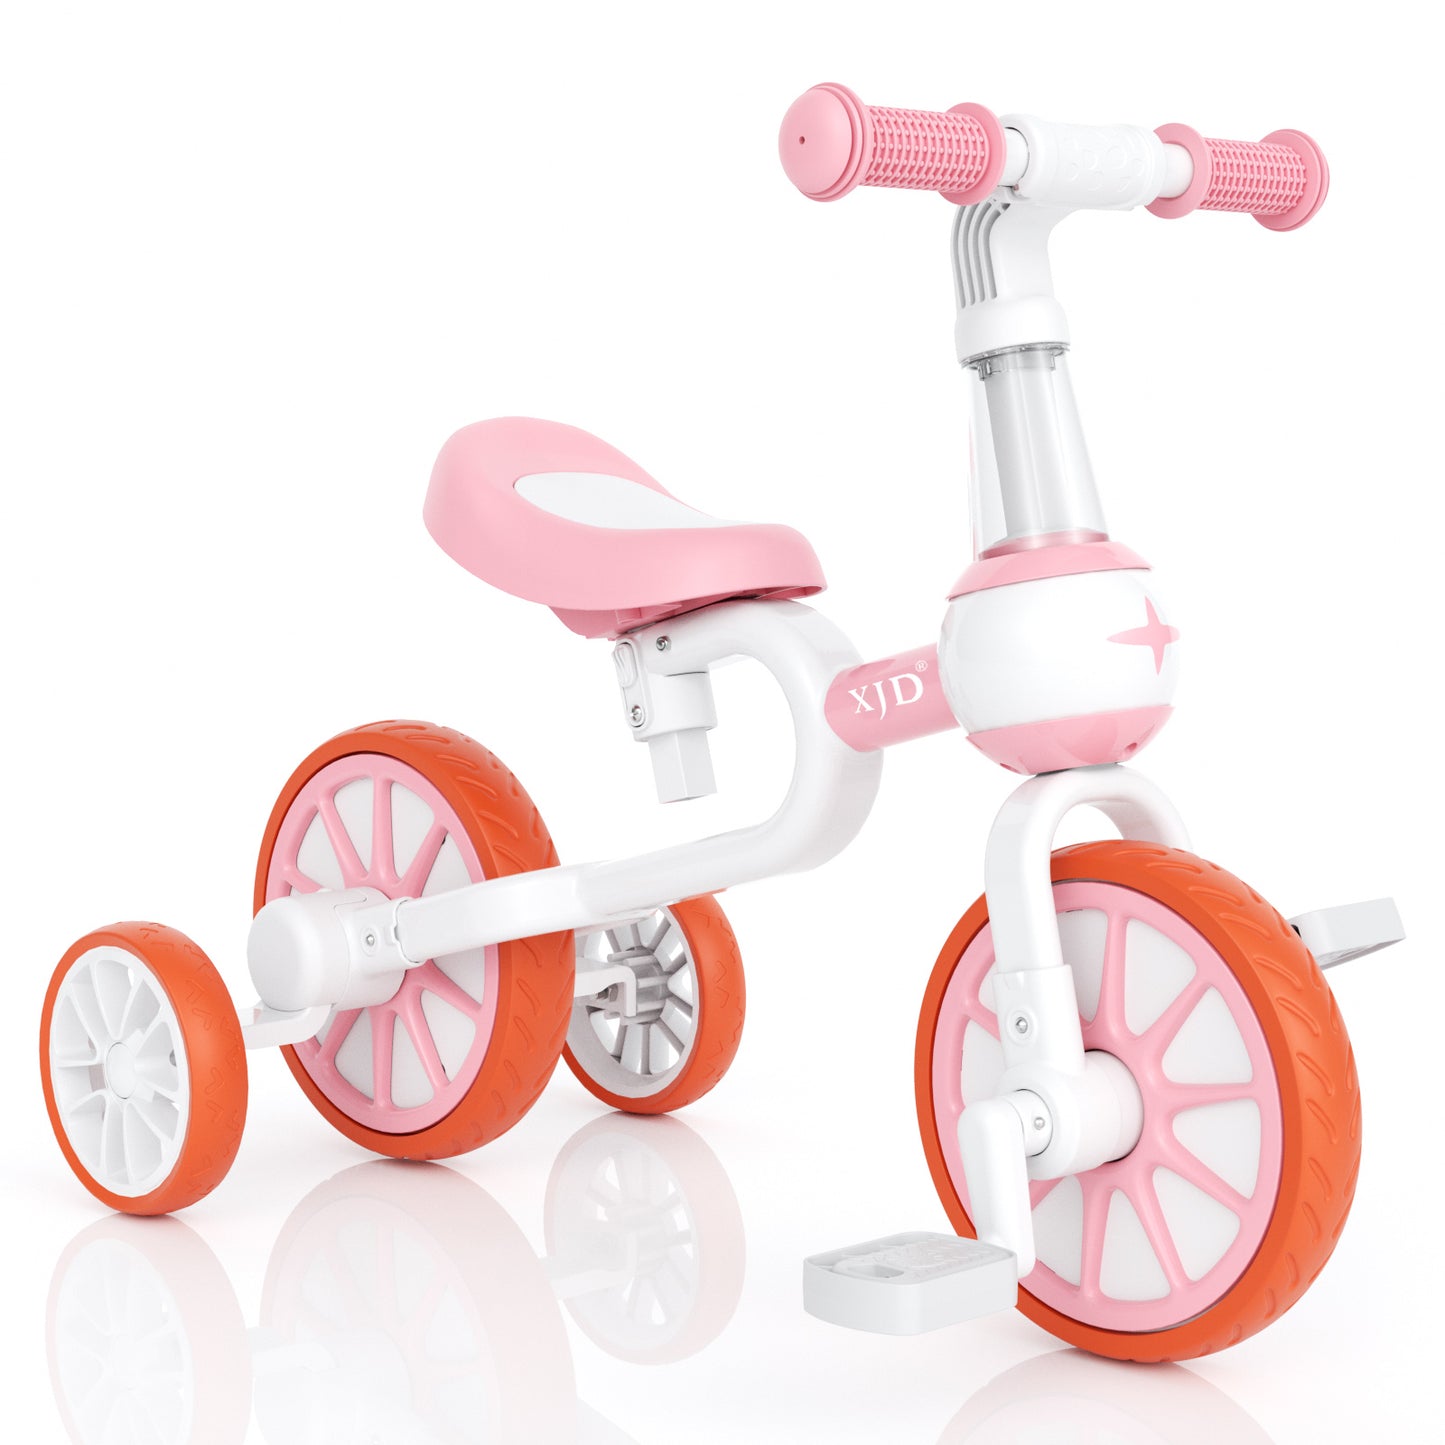 1XJD 3 in 1 Kids Tricycles for 1-3 year olds Trikes for Toddler Tricycles Baby Bike,Pink